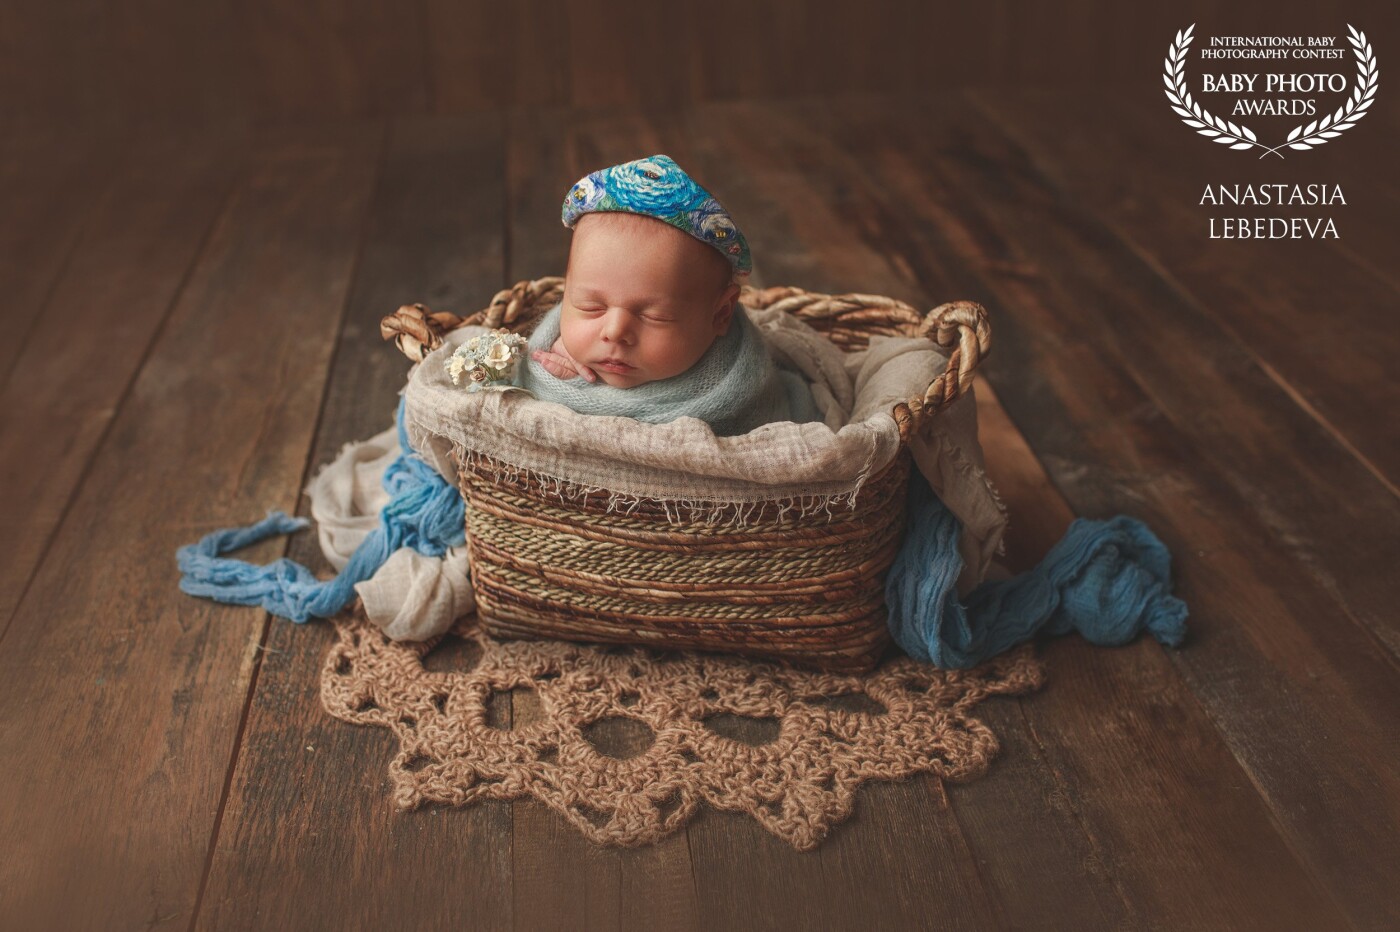 In this photo, newborn Anna. The baby was very fit, the image of a Russian beauty. The name of the jewelry on the head of the baby-kokoshnik. It is very nice.